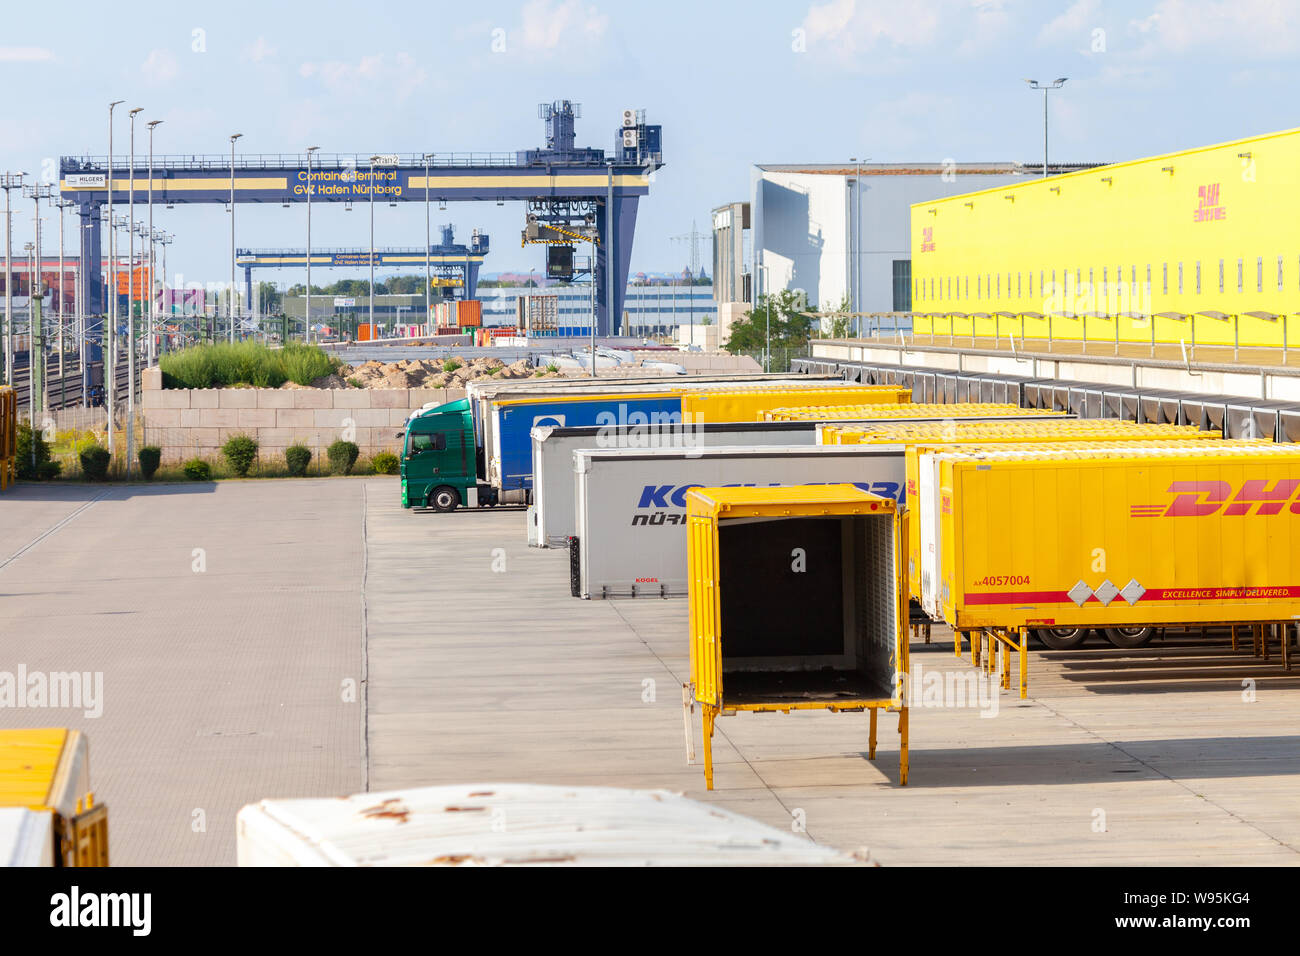 NUREMBERG / GERMANY - AUGUST 4, 2019: Freight logisitc center from international courier, parcel, and express mail company DHL in Nuremberg. Stock Photo